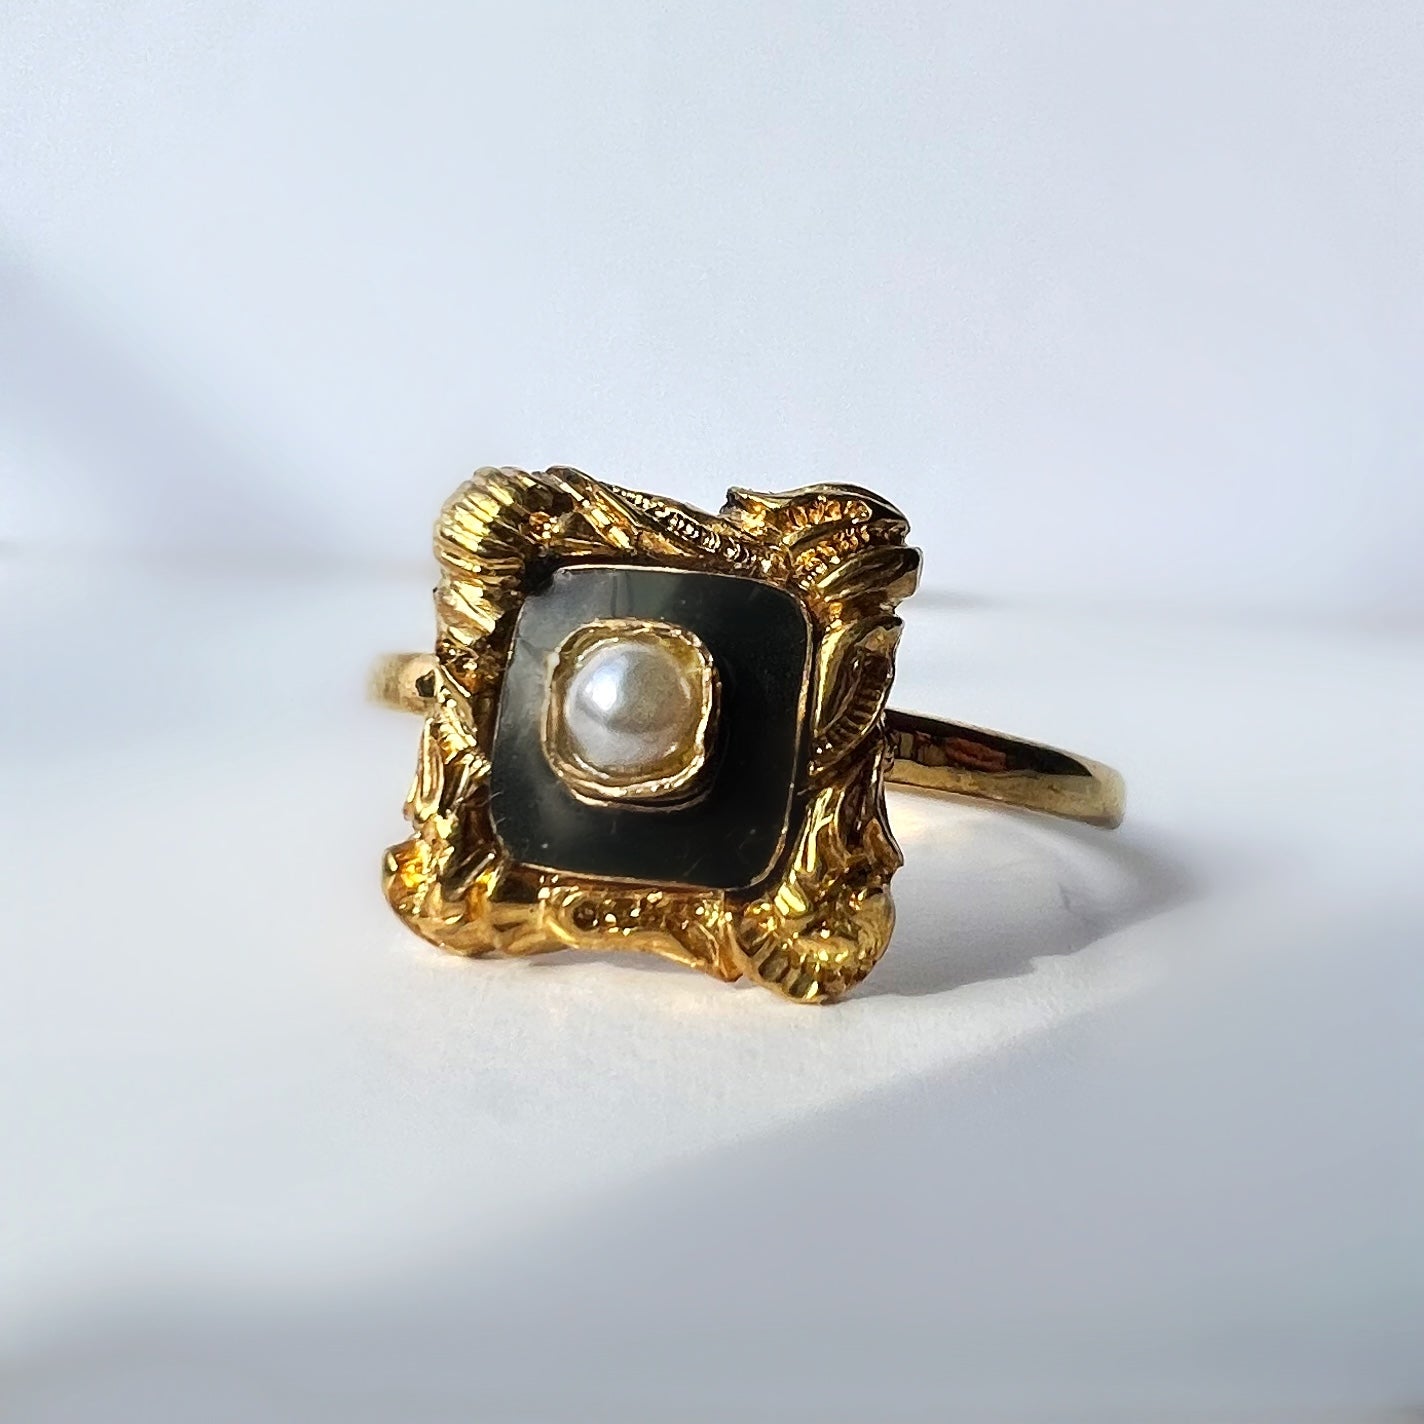 Antique Enamel, Gold and Pearl Ring